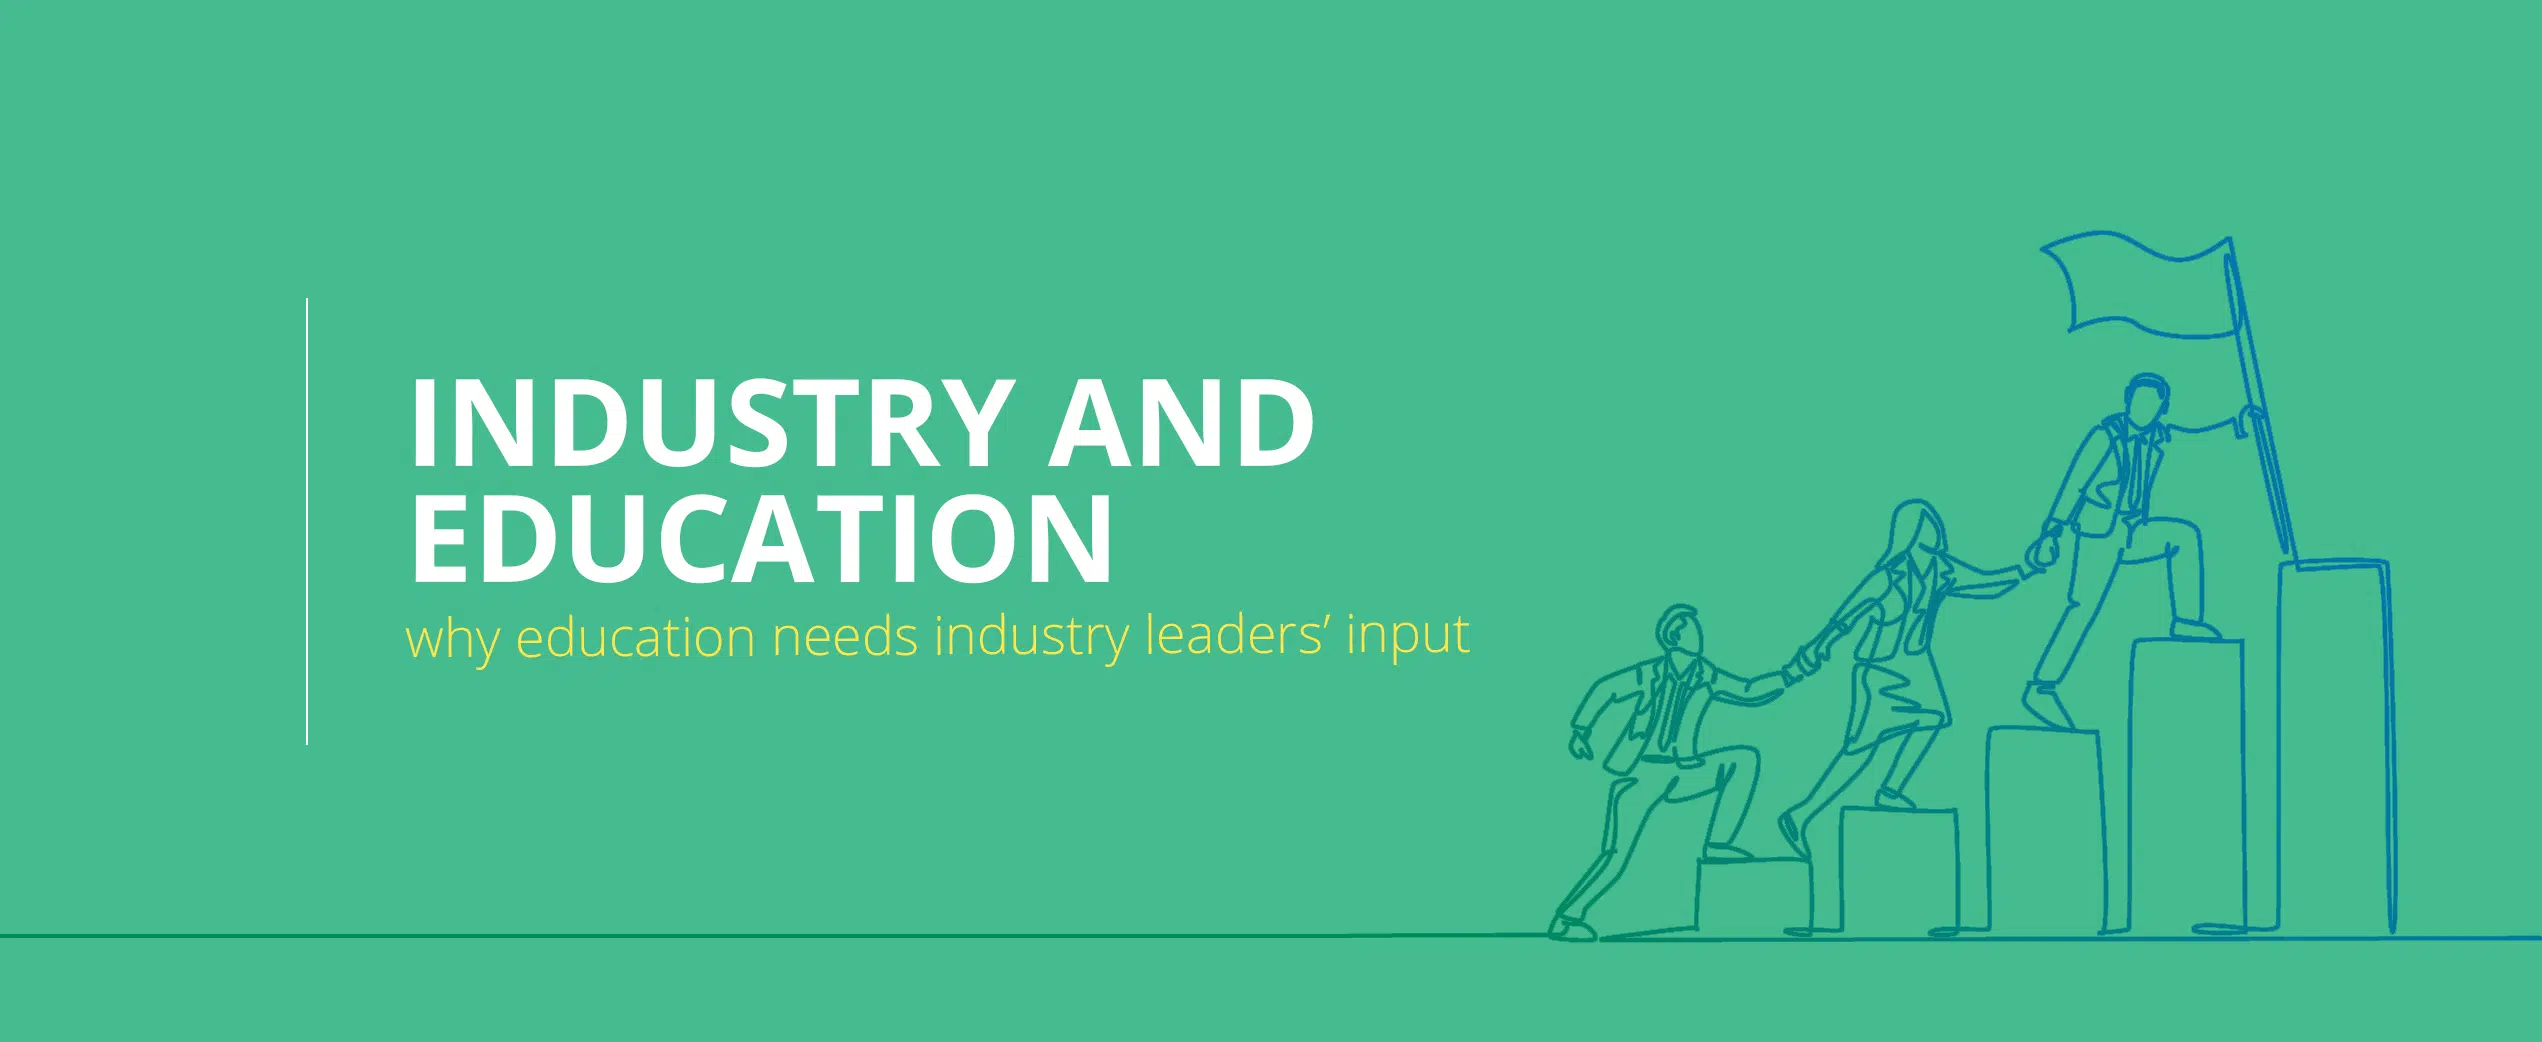 Why industry and education need to work together